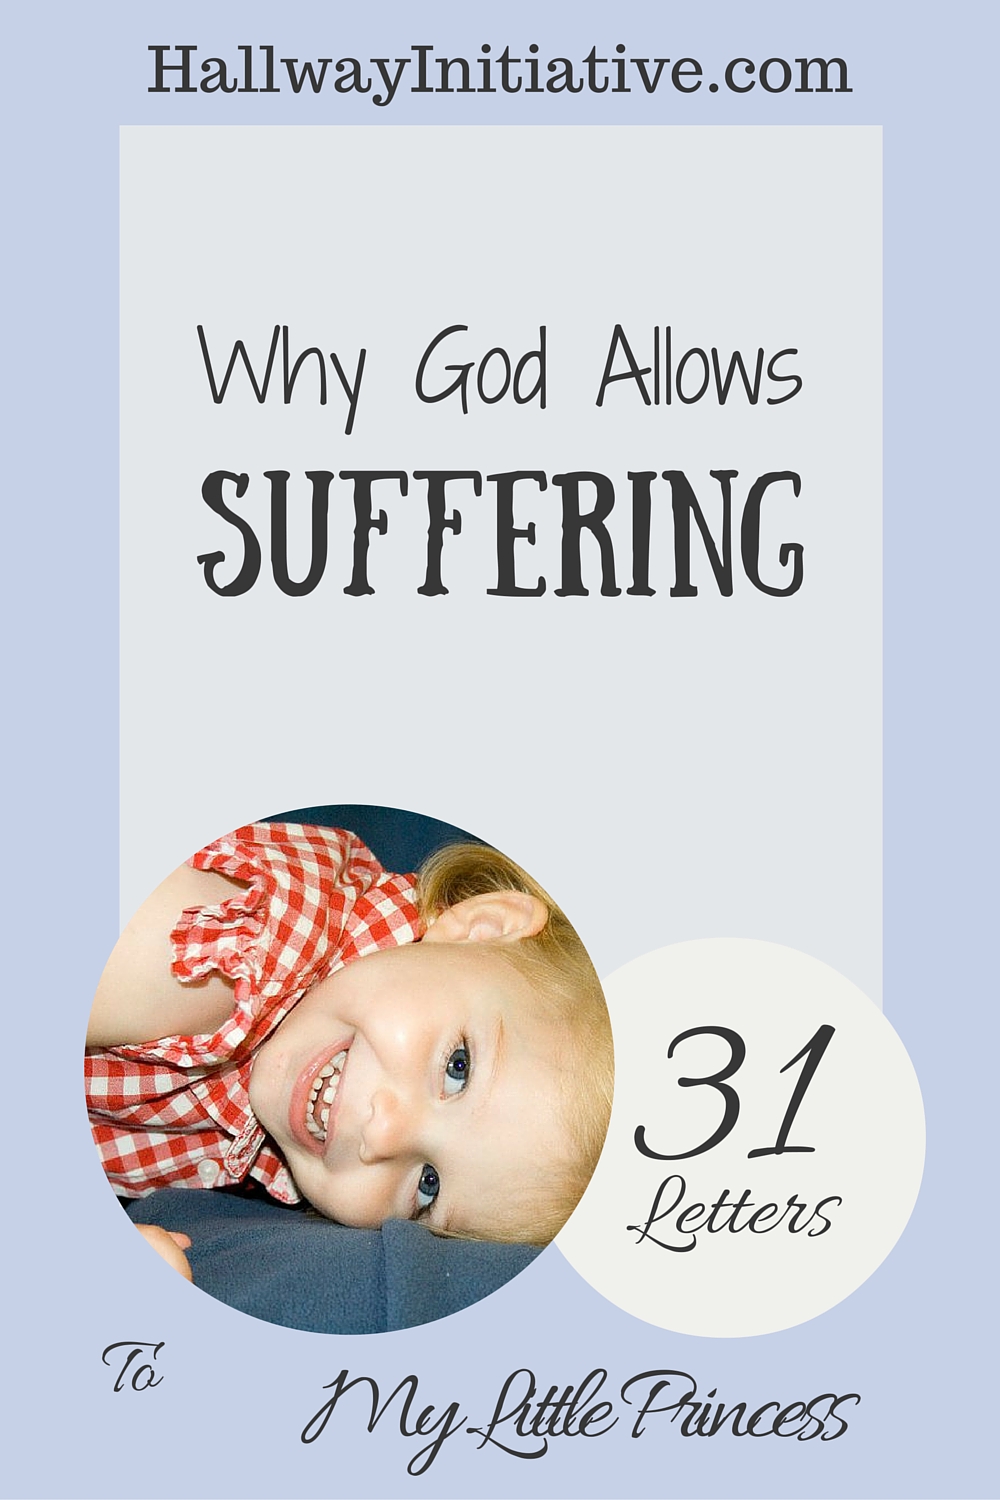 Why God allows suffering